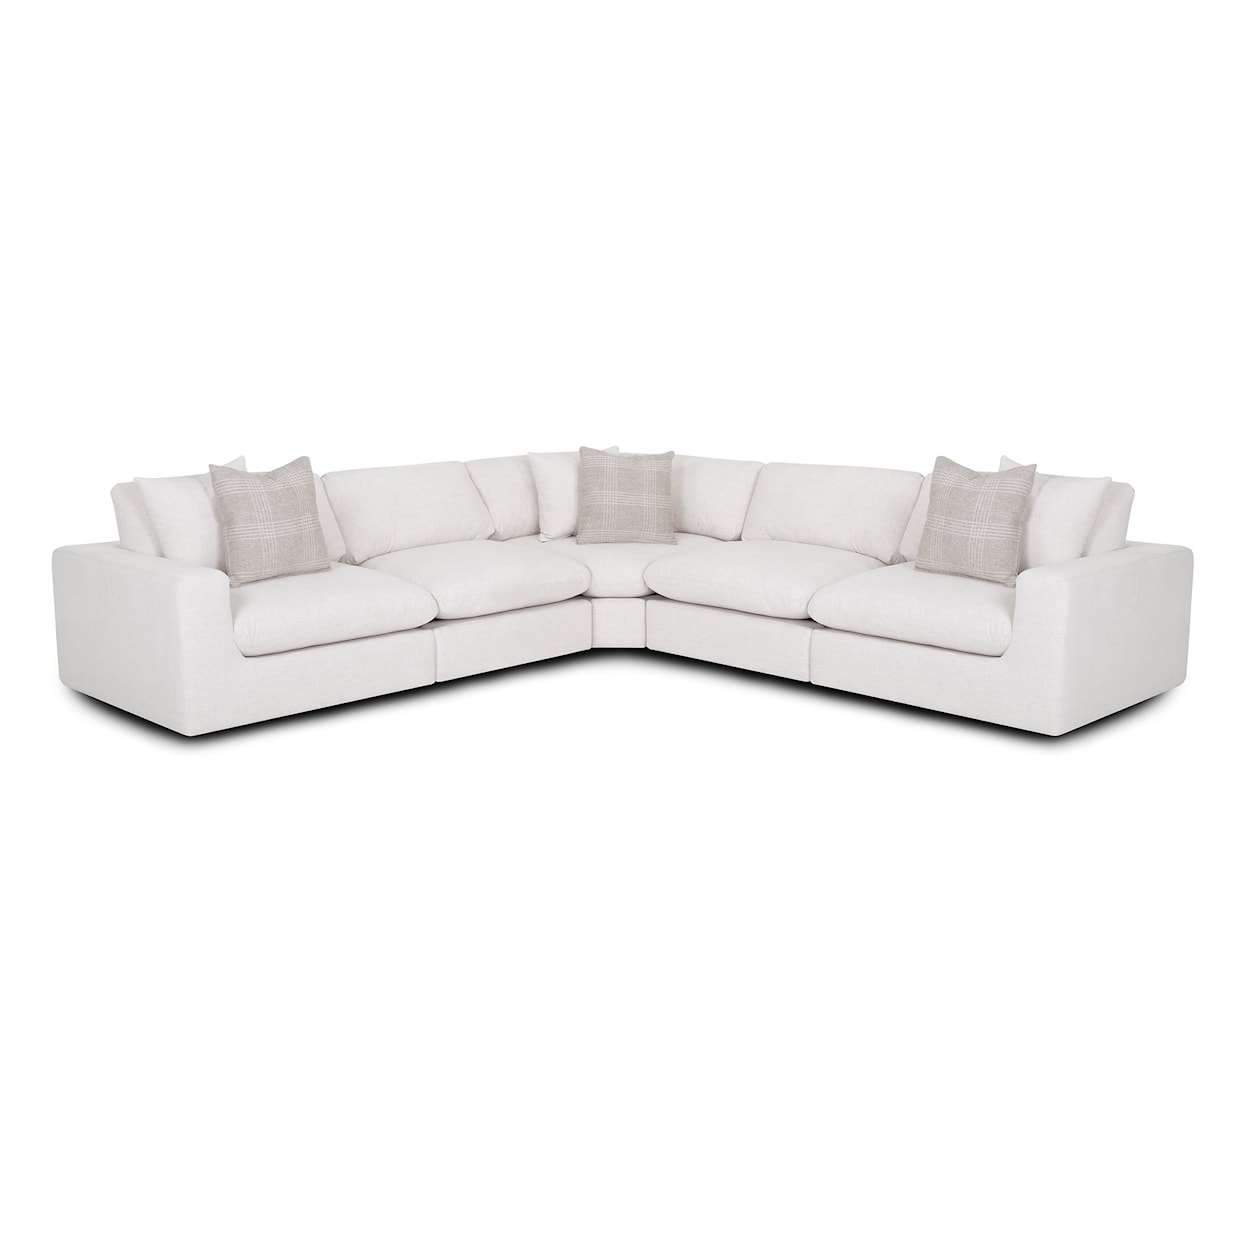 Franklin 972 Darcy Sectional 5-Piece L-Shaped Modular Sectional